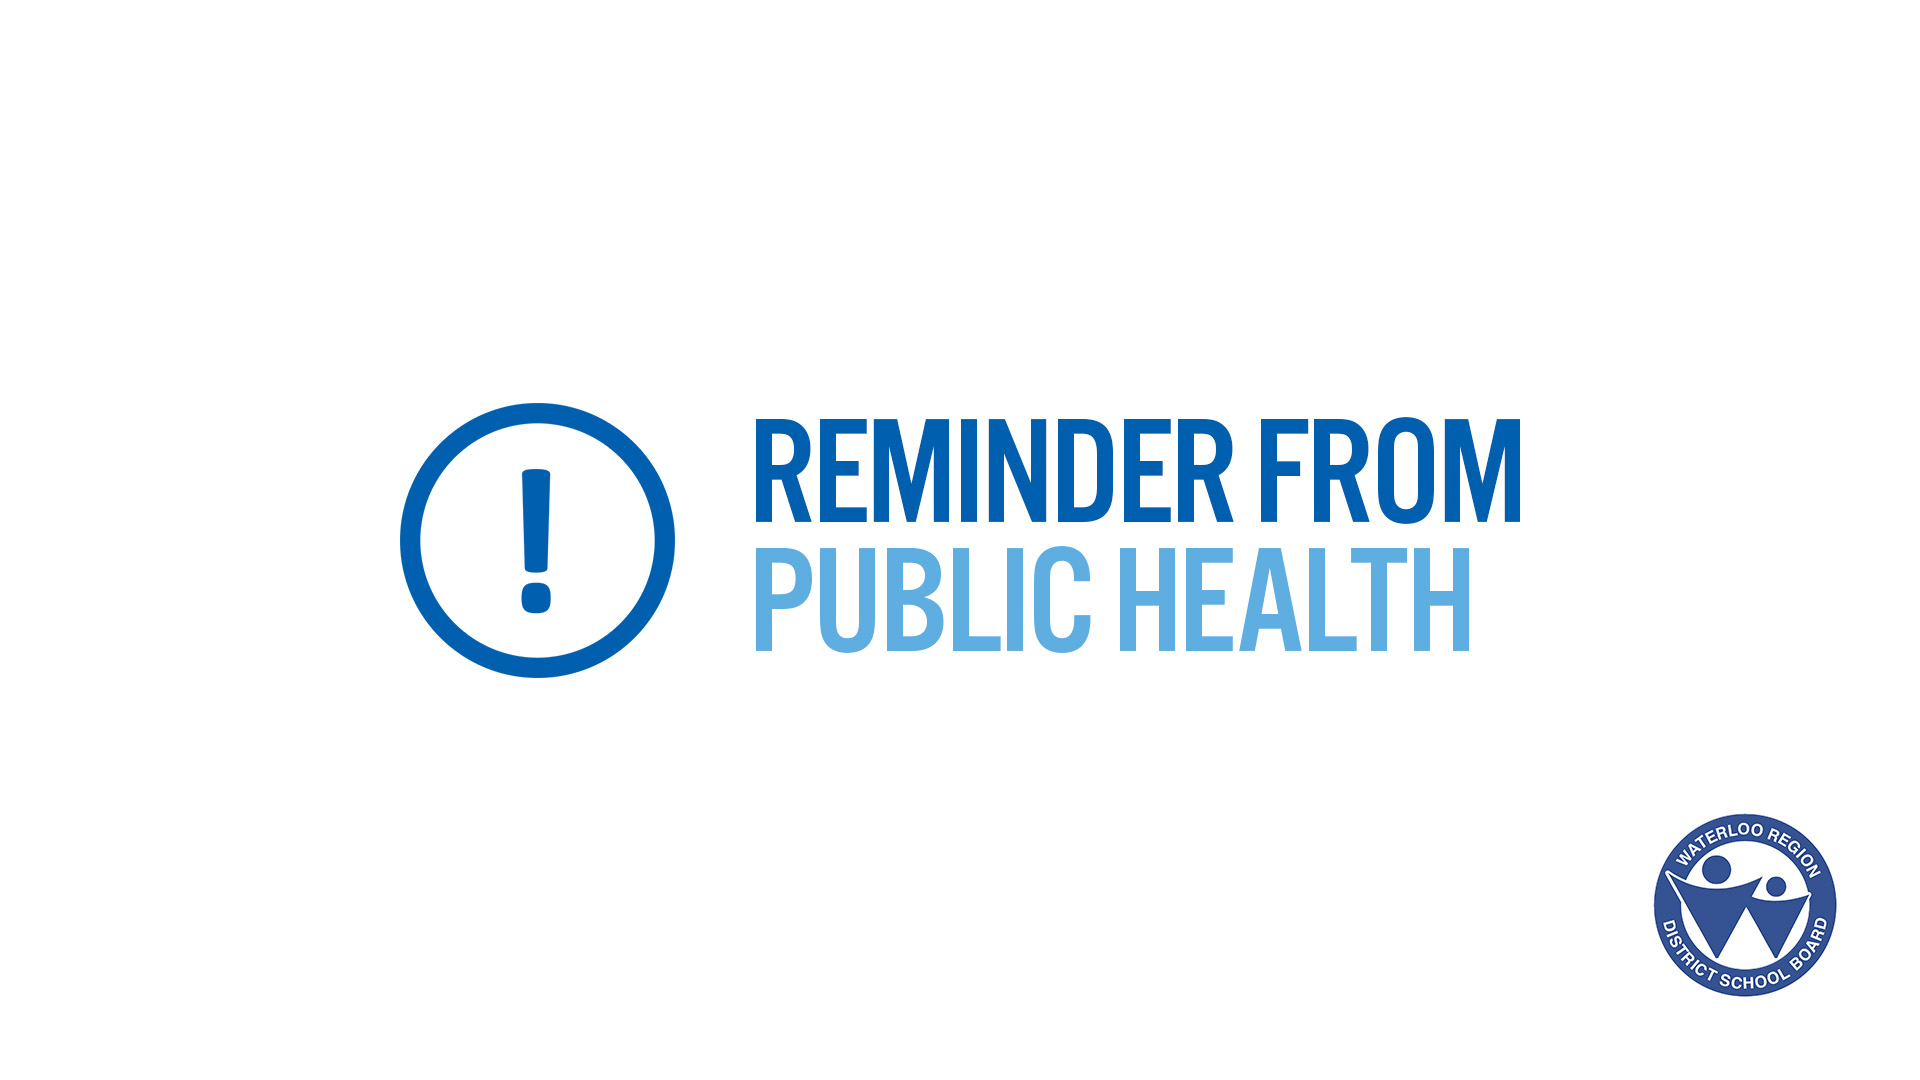 Reminder from Public Health